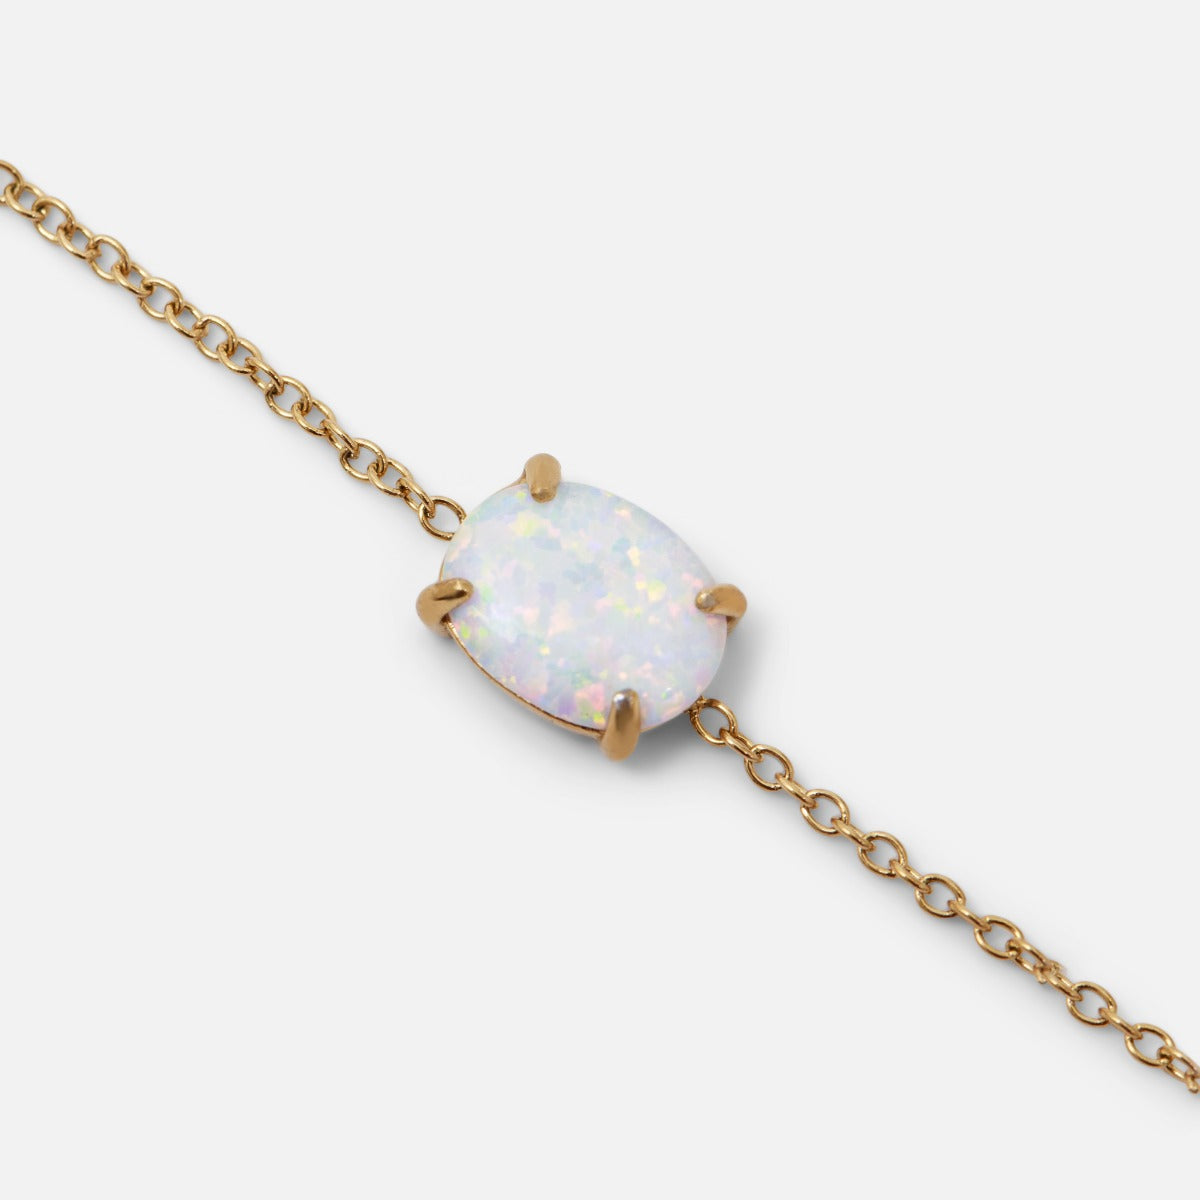 Stainless steel gold bracelet with opal stone effect charm